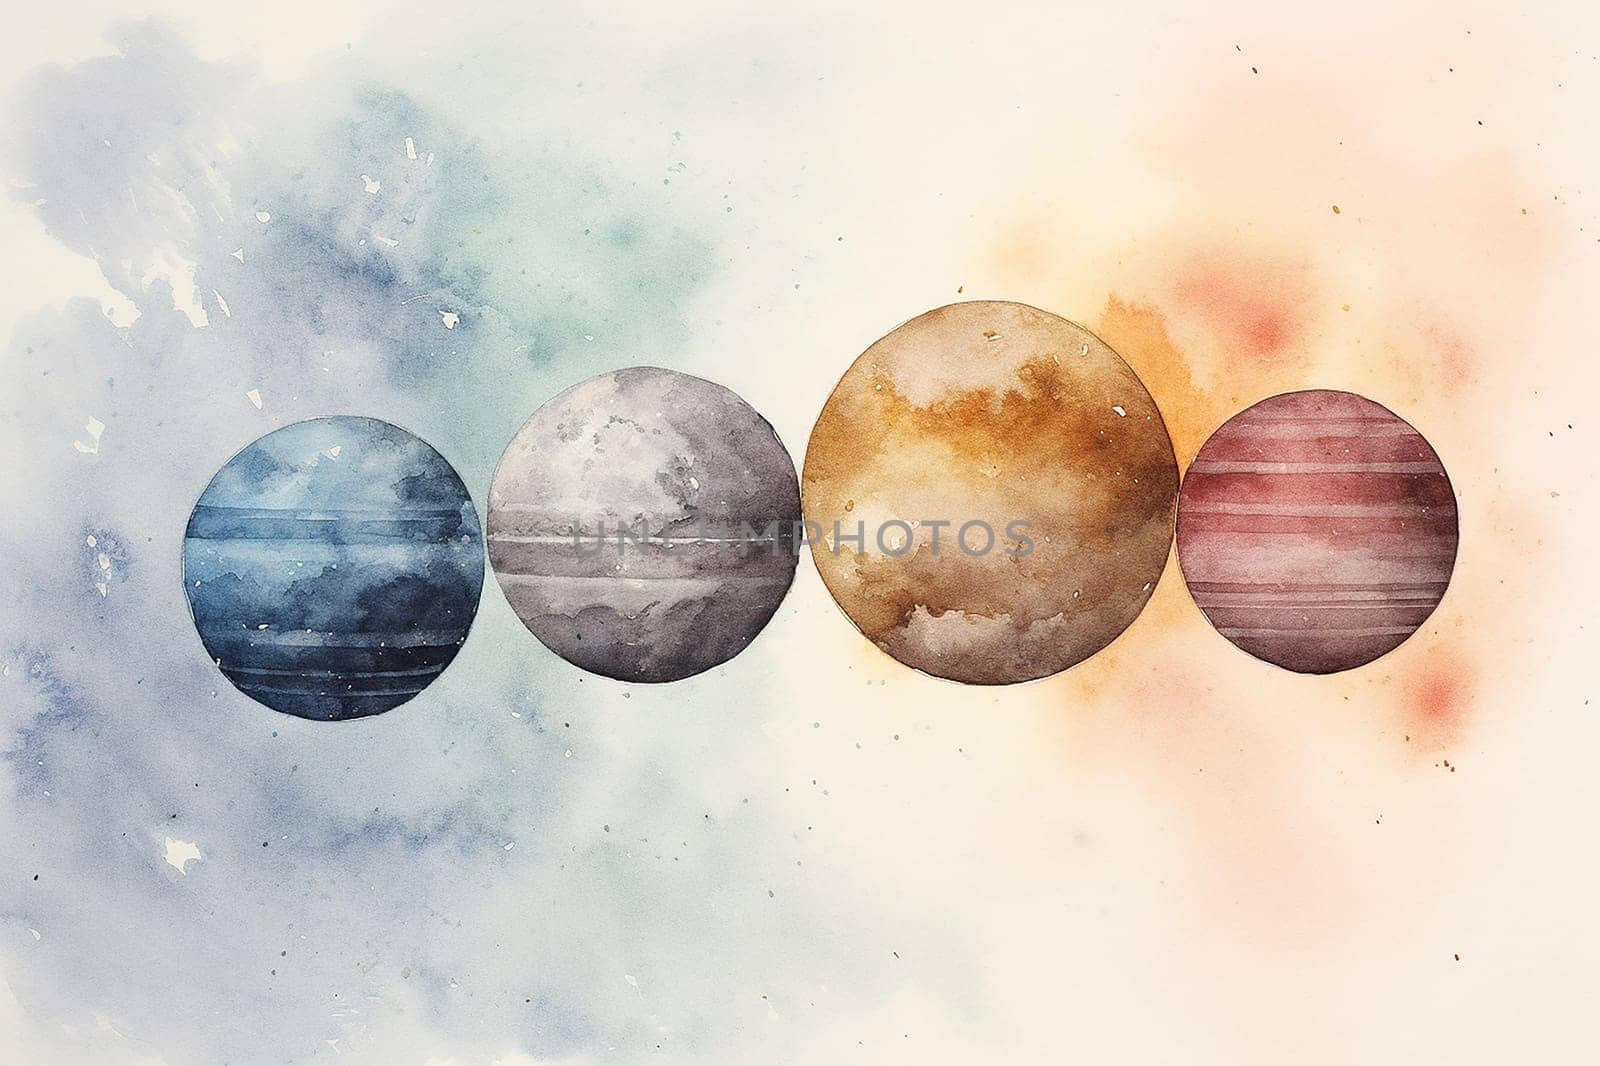 Watercolor painting of five planets